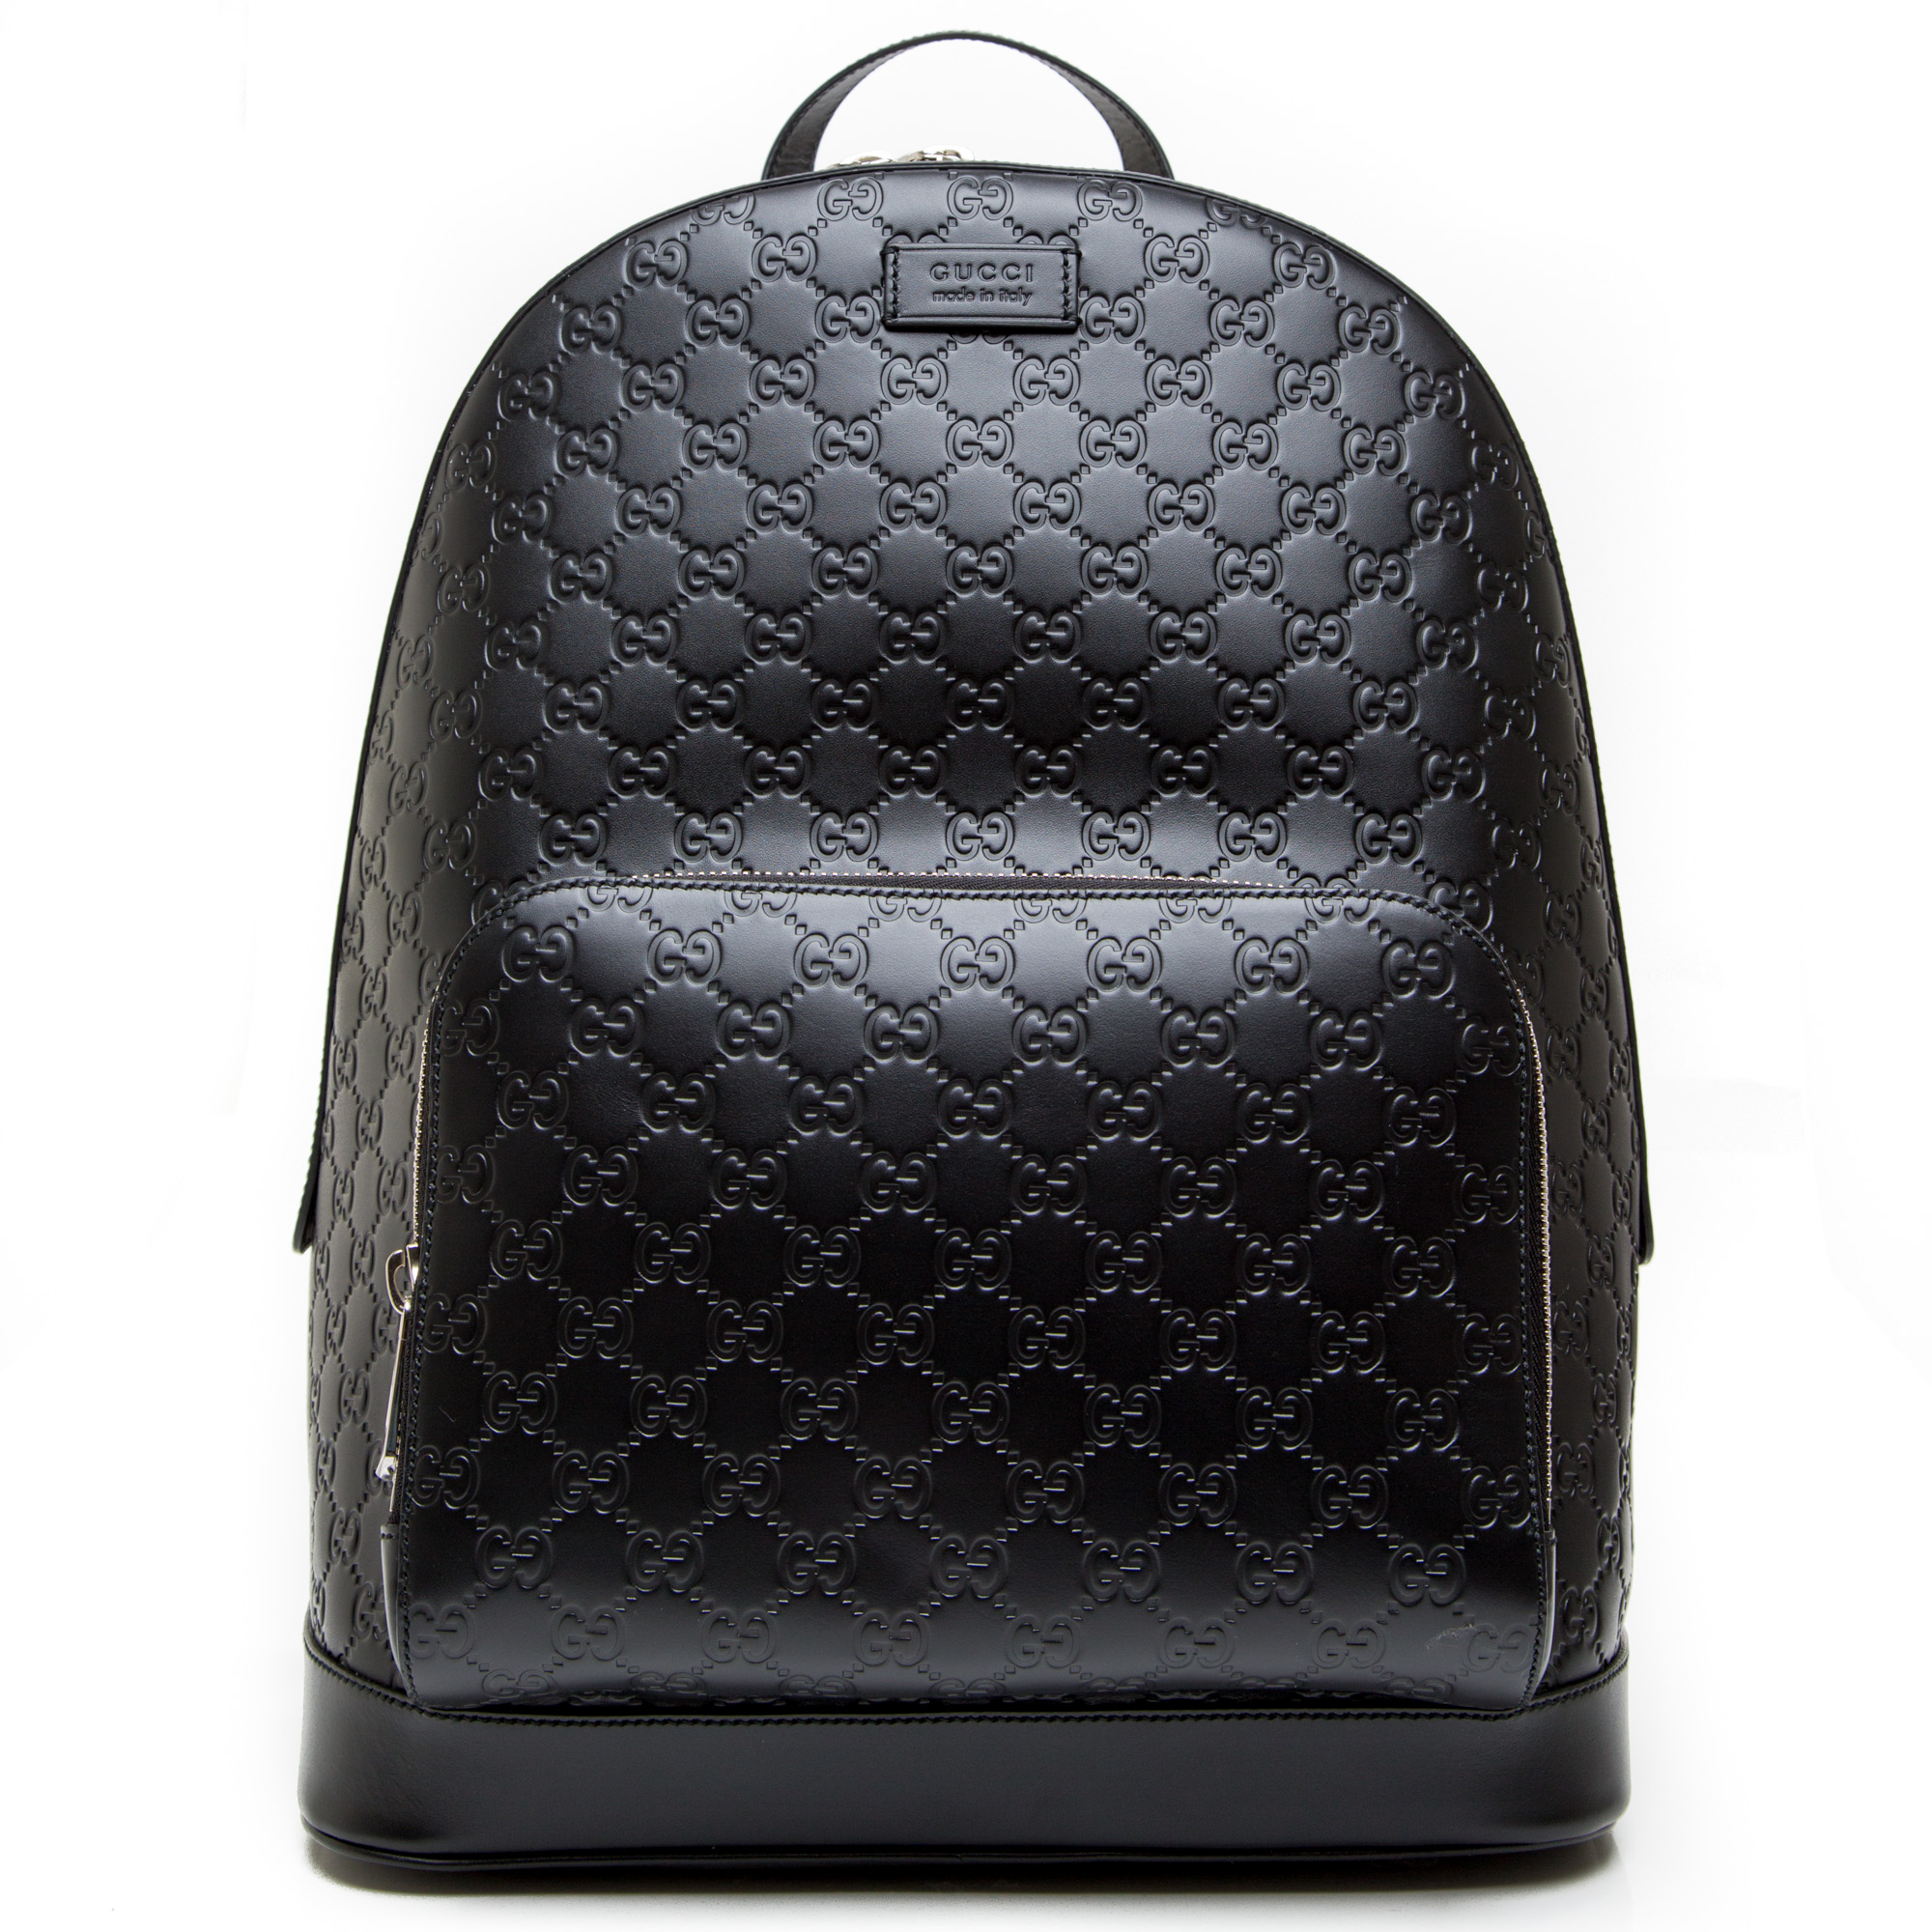 Gucci, Bags, Gucci Signature Leather Backpack